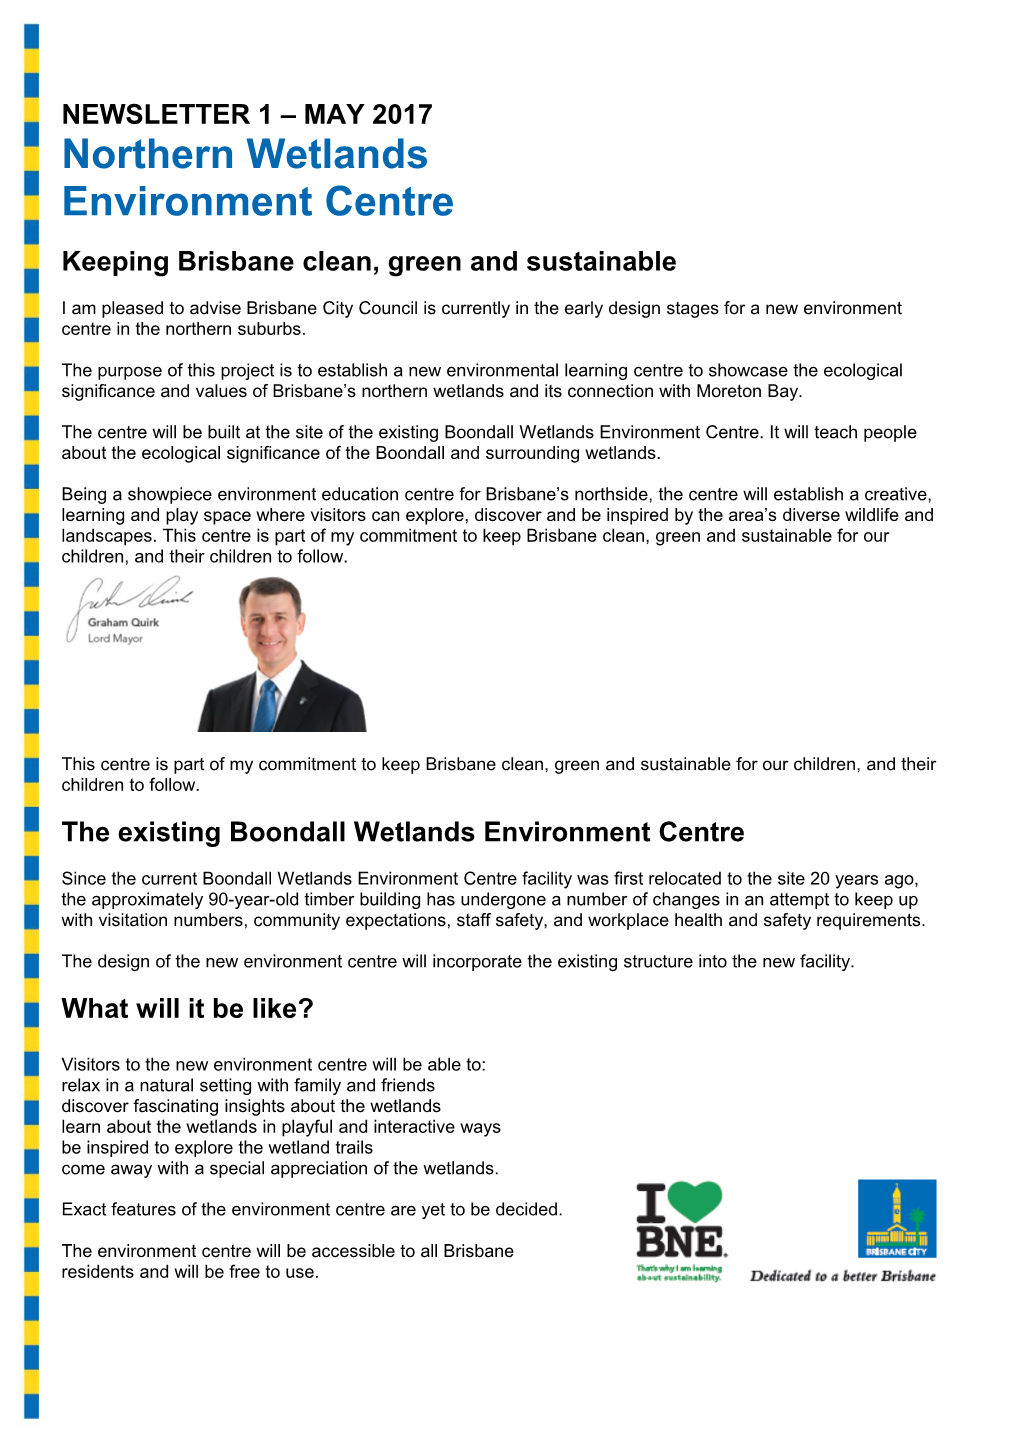 Keeping Brisbane Clean, Green and Sustainable